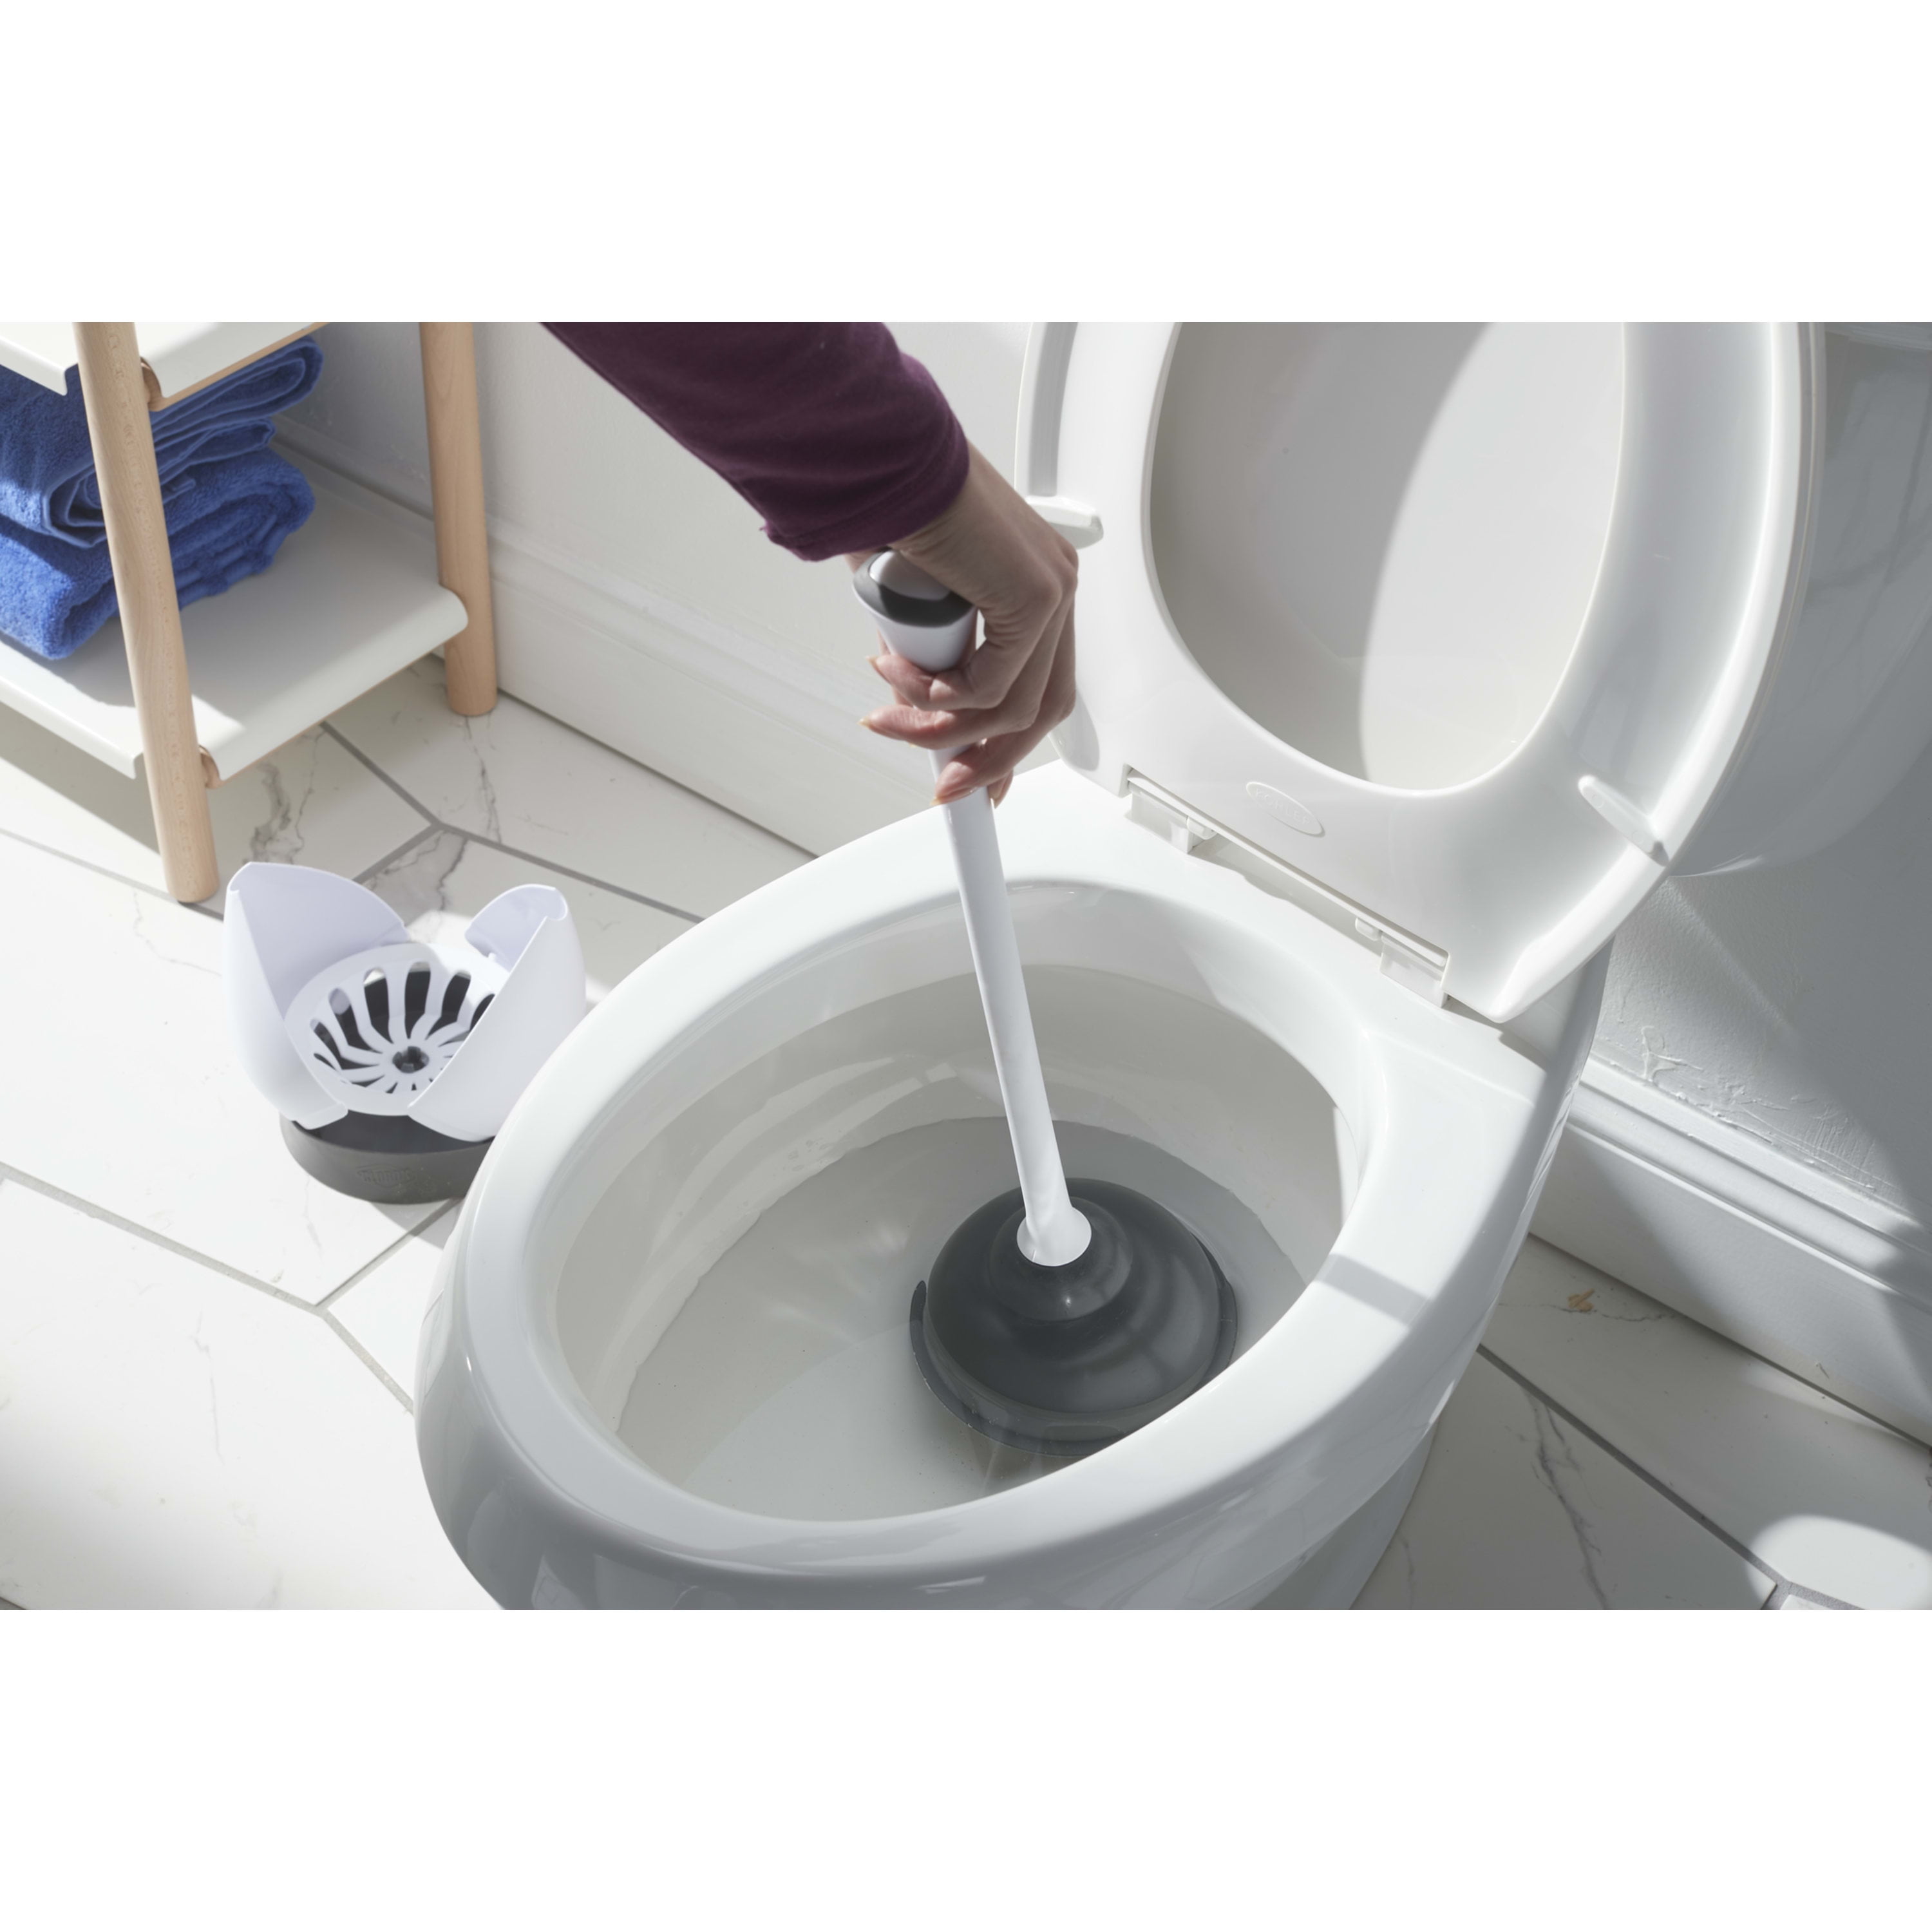 Clorox Toilet Plunger with Hideaway Storage Caddy – Encompass RL